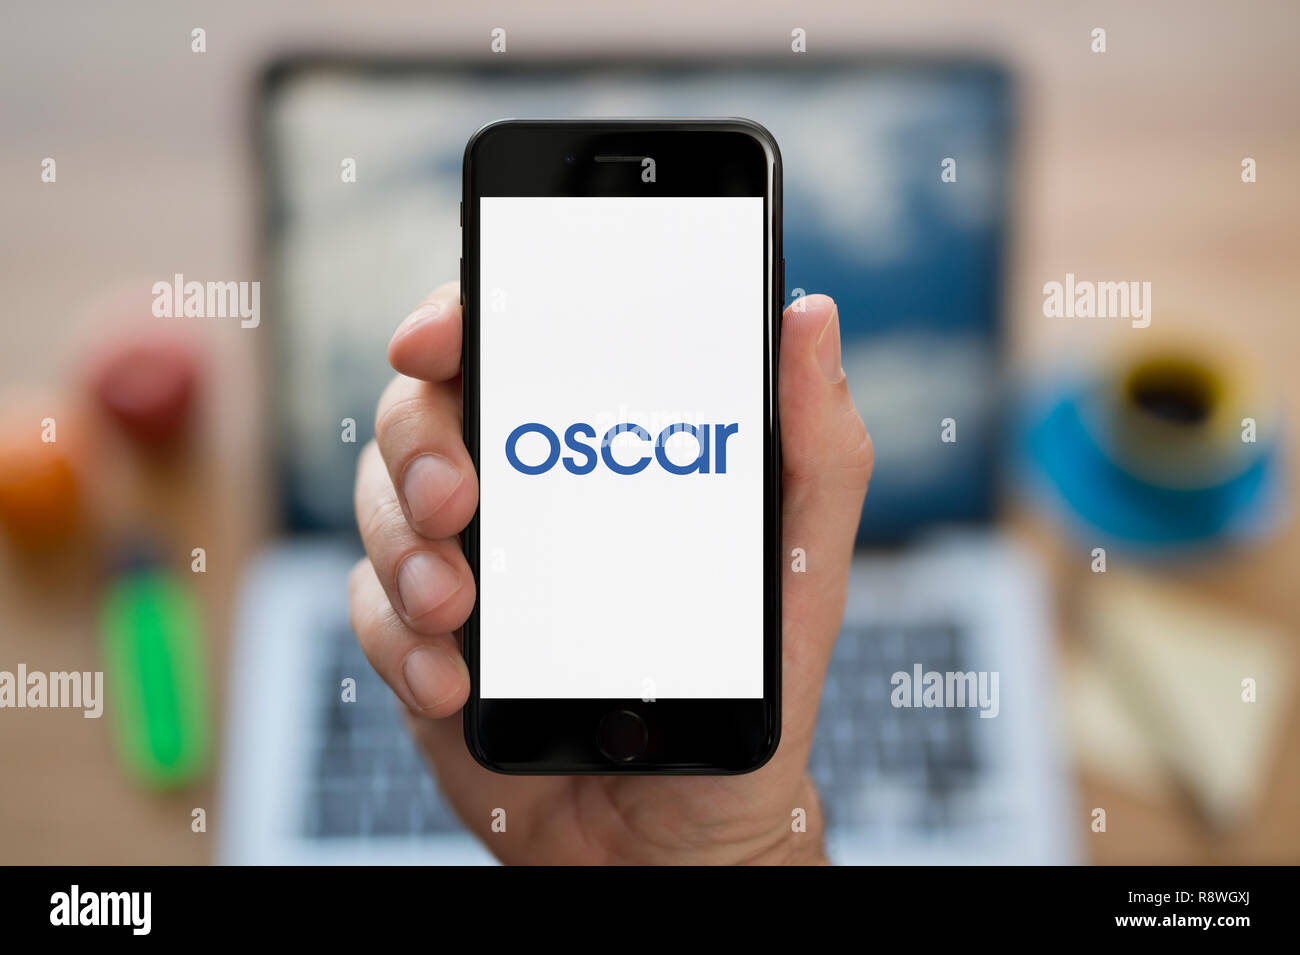 A man looks at his iPhone which displays the Oscar logo (Editorial use only). Stock Photo